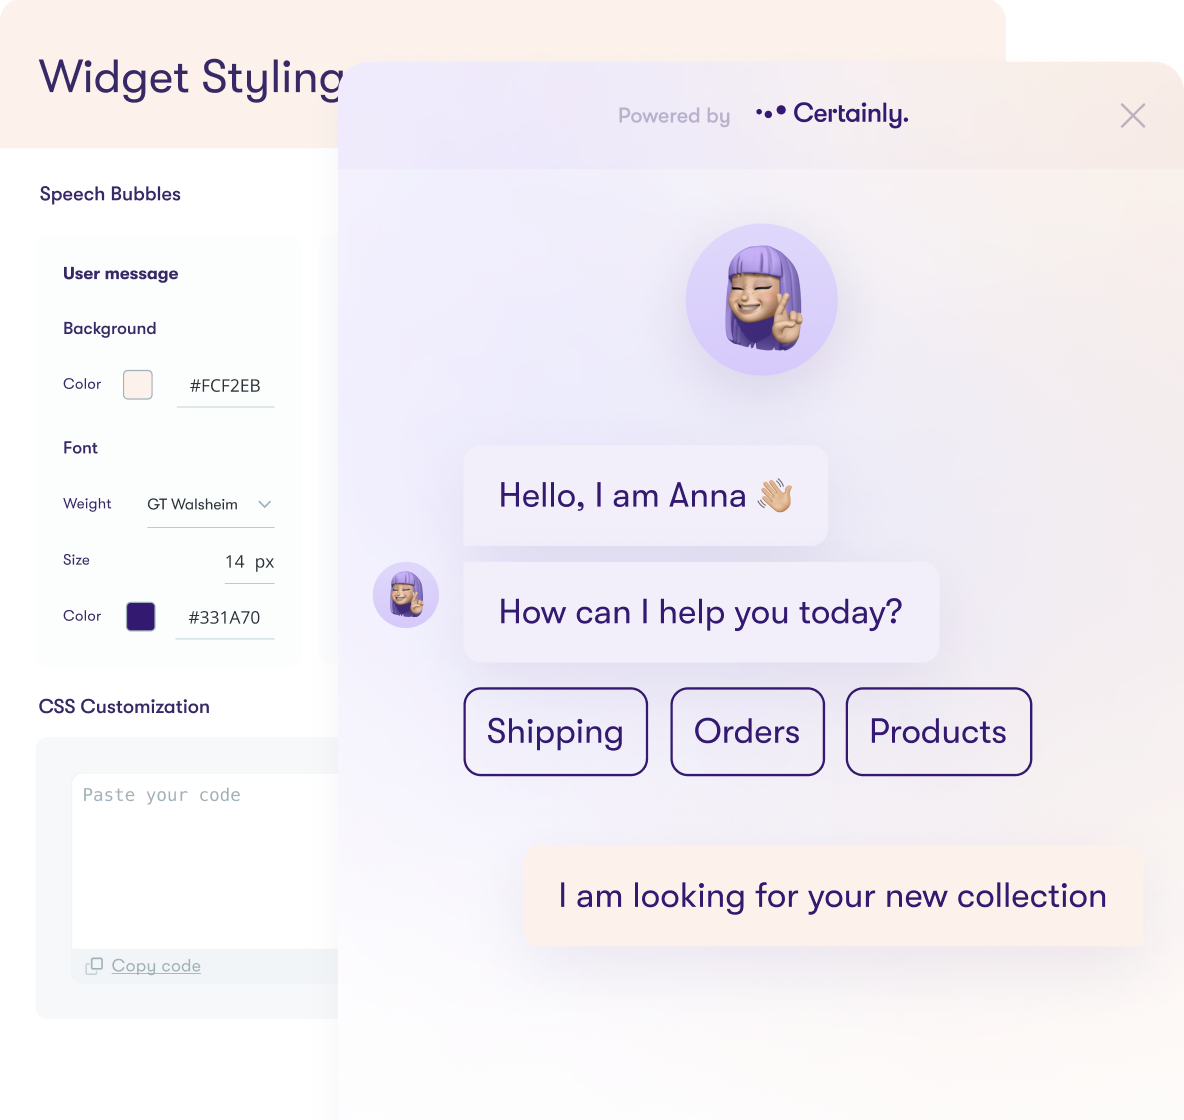 A screenshot of the Certainly widget styling, overlayed by a customized chatbot widget.